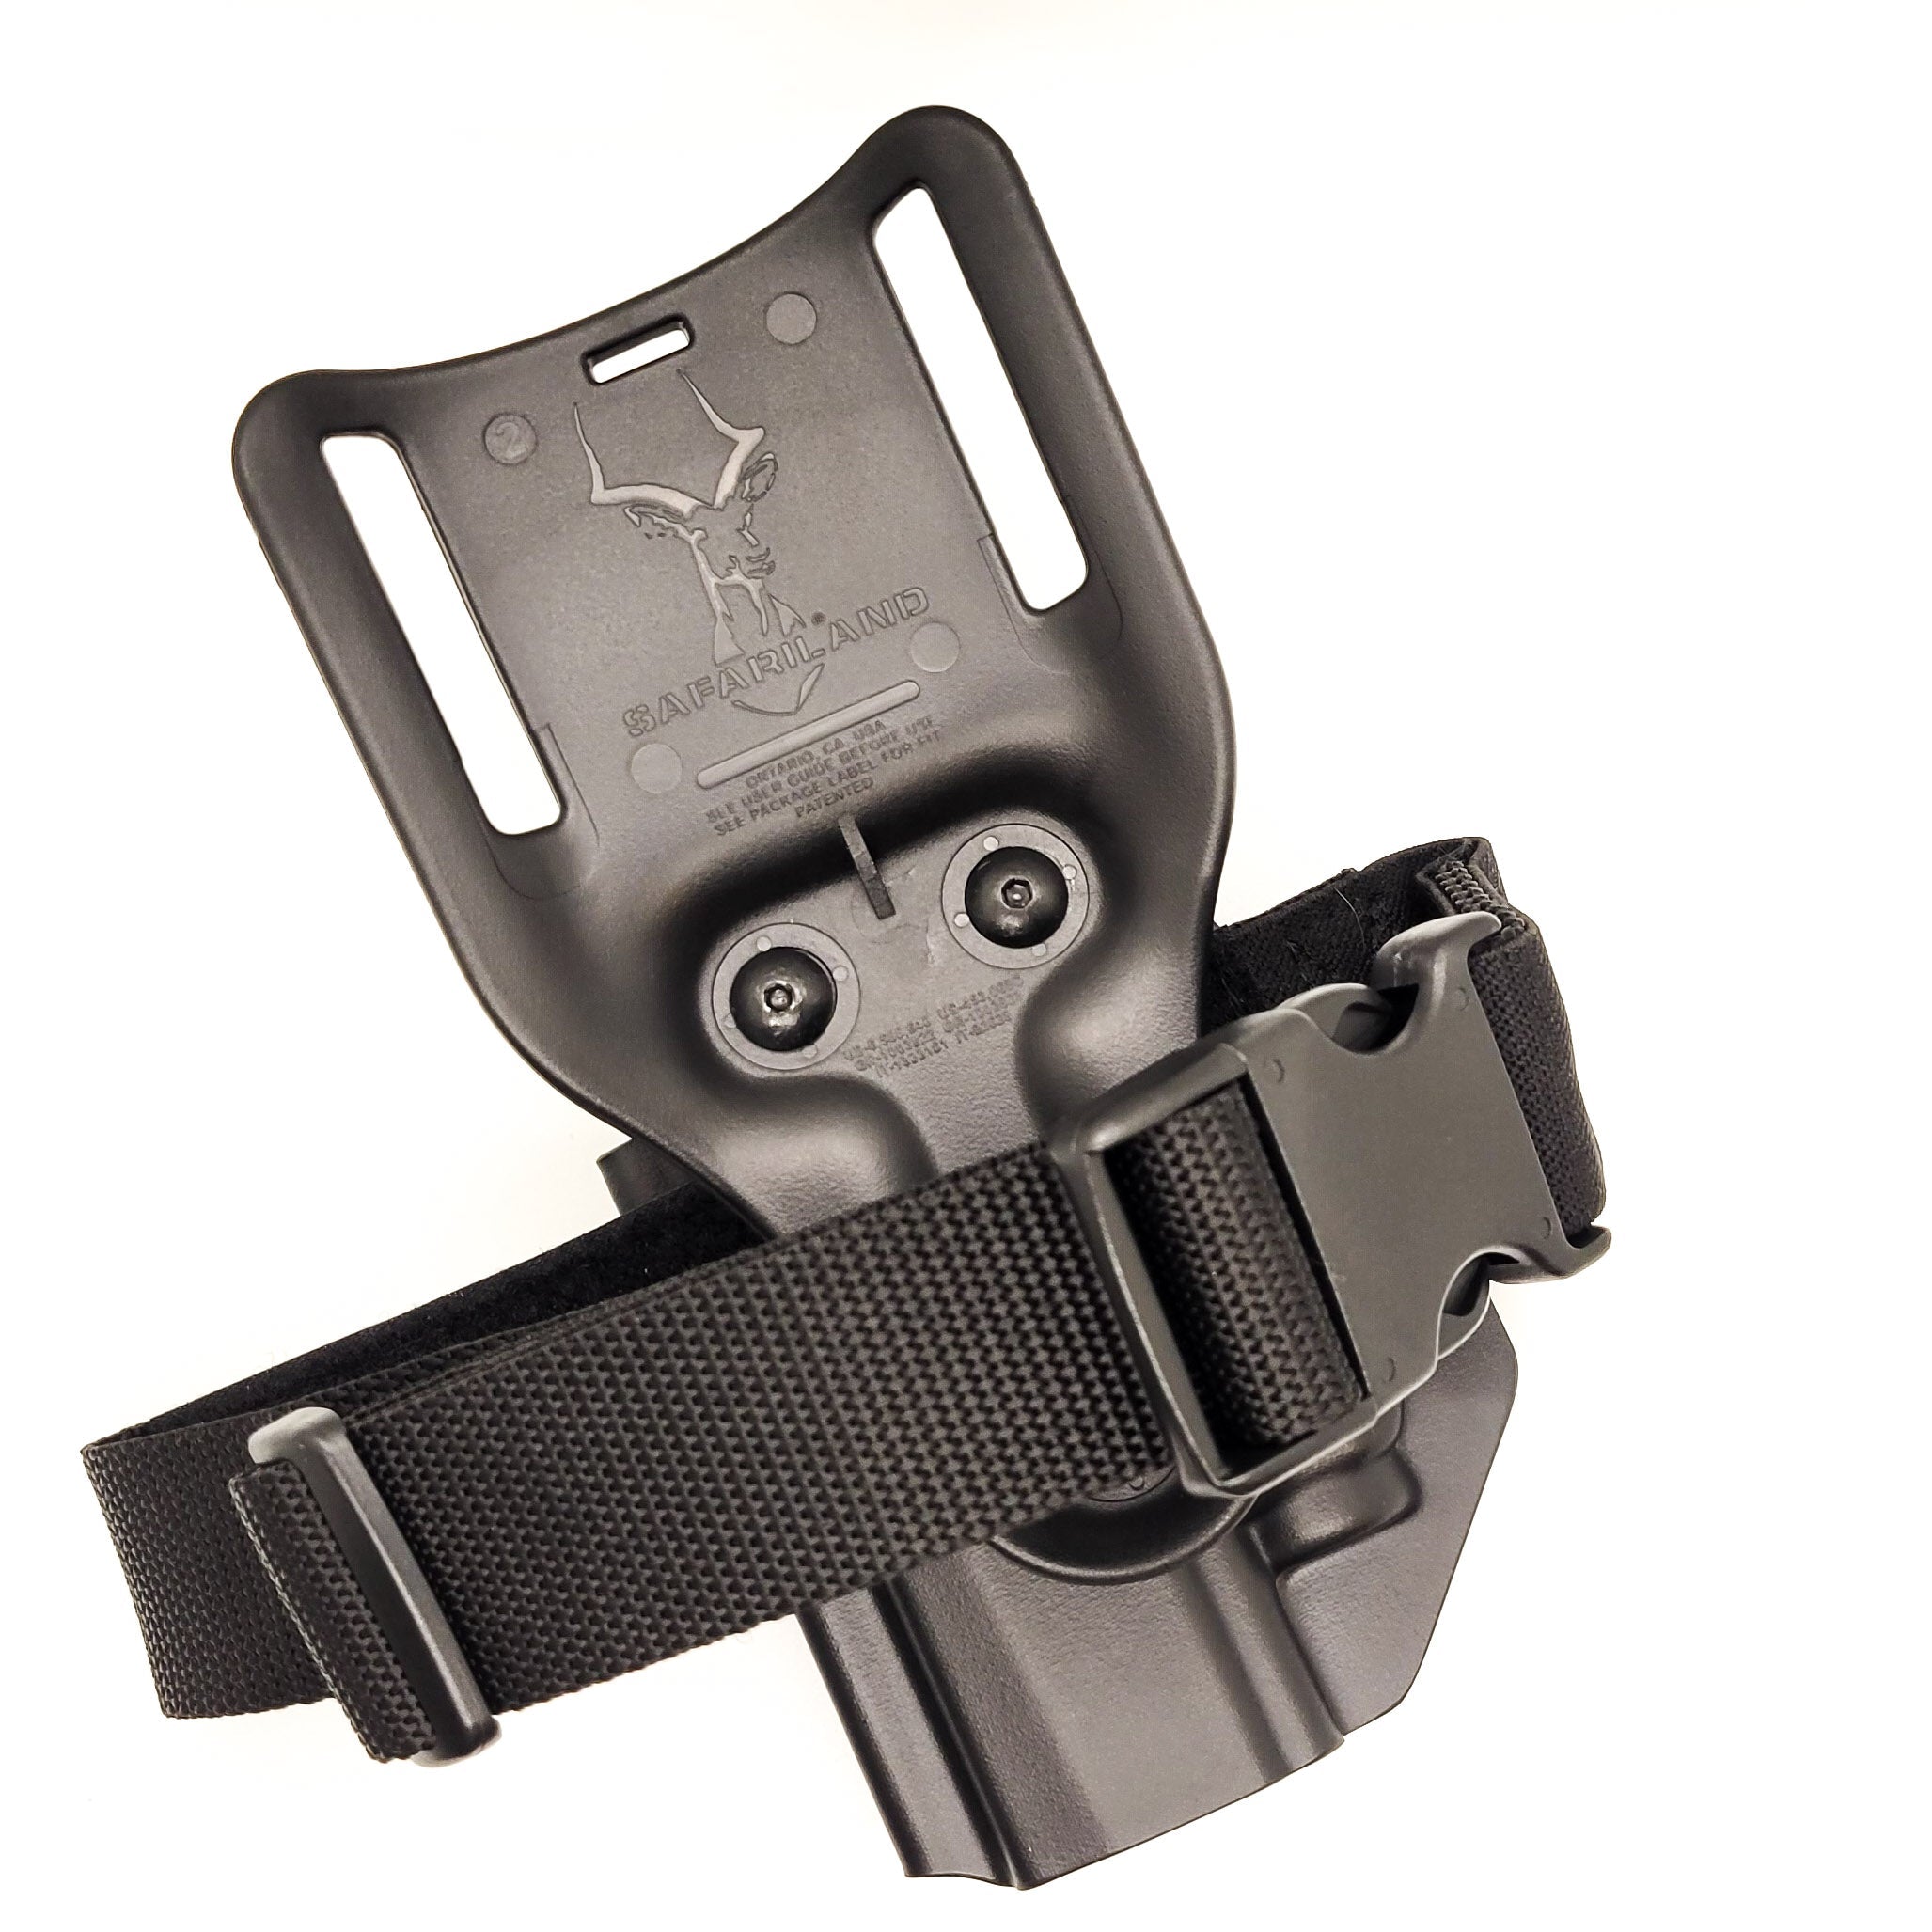 Outside Waistband Holster designed to fit the Full Size and Carry P320 series with Streamlight TLR-7 and TLR-7A weapon mounted light and Align Tactical Thumb Rest Takedown Lever. Holster will accommodate the M17, M18, and X-Five models as well as the Carry and Compact using our competition belt mounting options. 